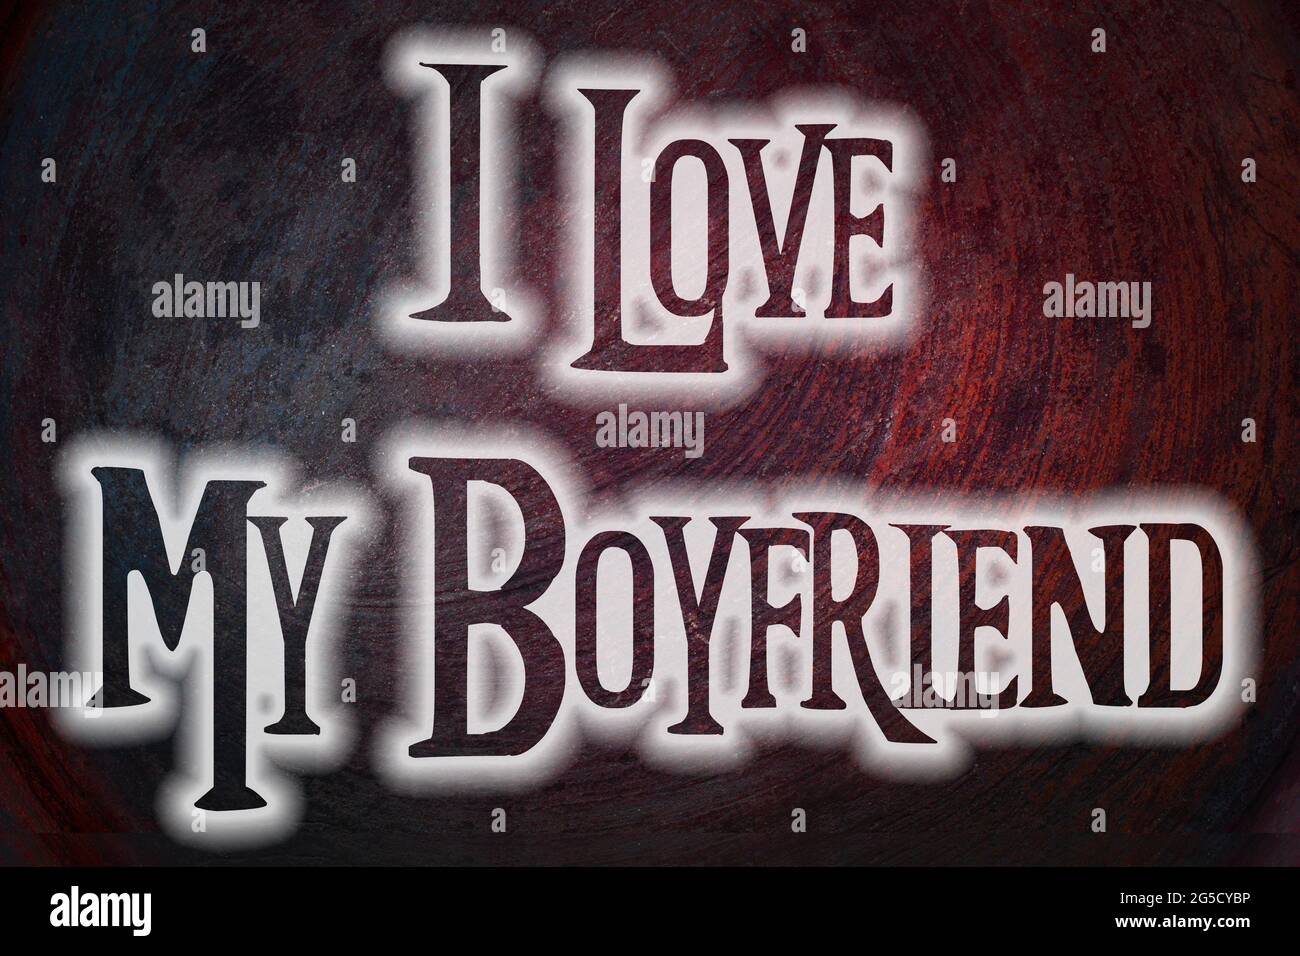 i love my boyfriend backgrounds for facebook